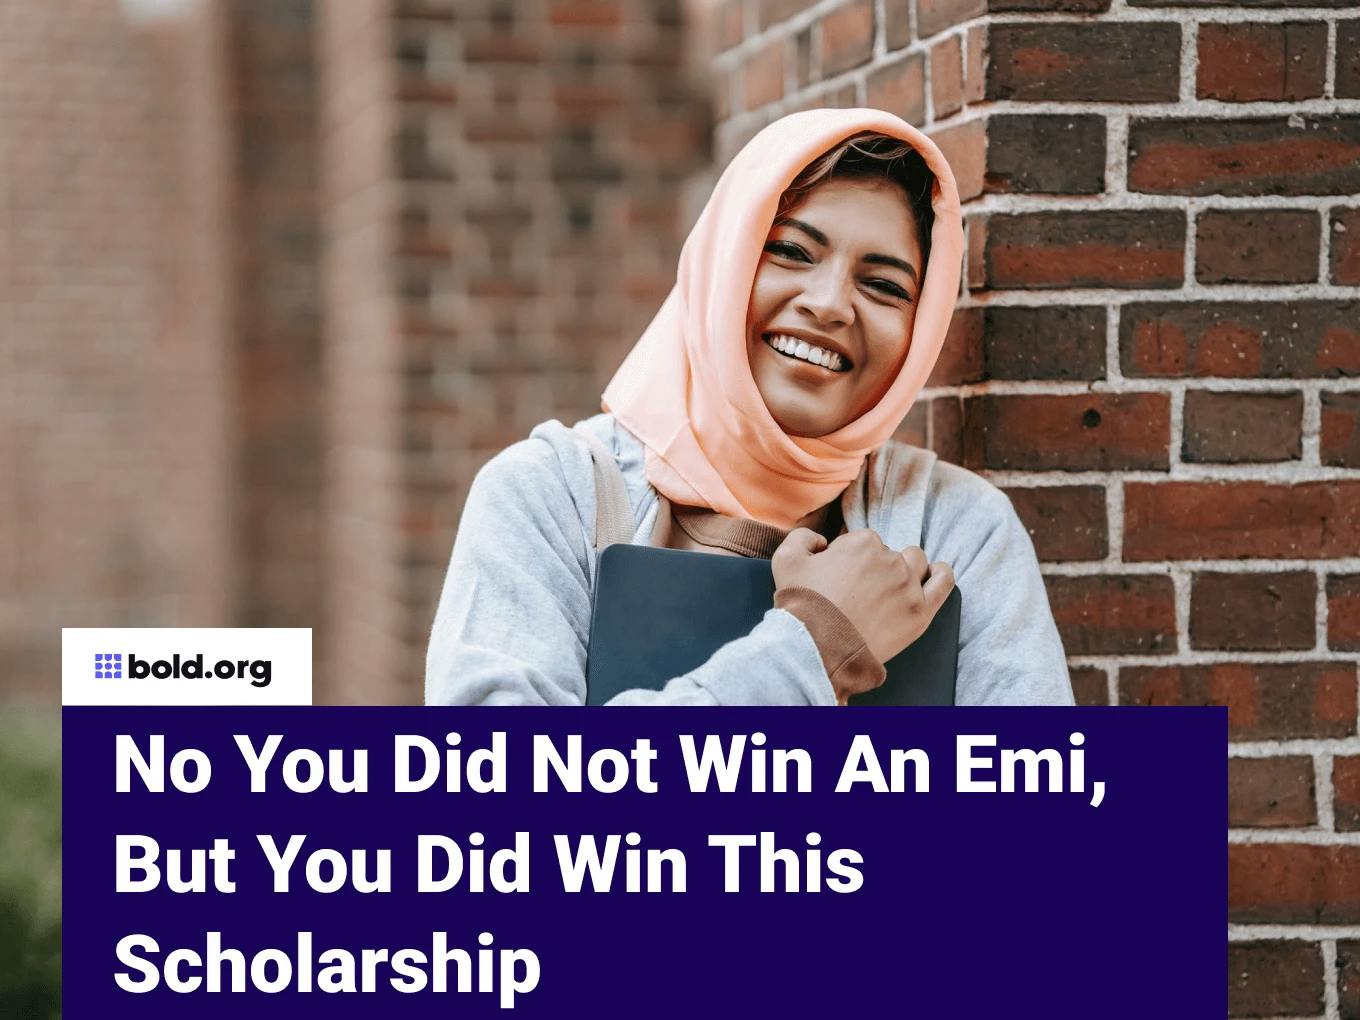 No You Did Not Win An Emi, But You Did Win This Scholarship